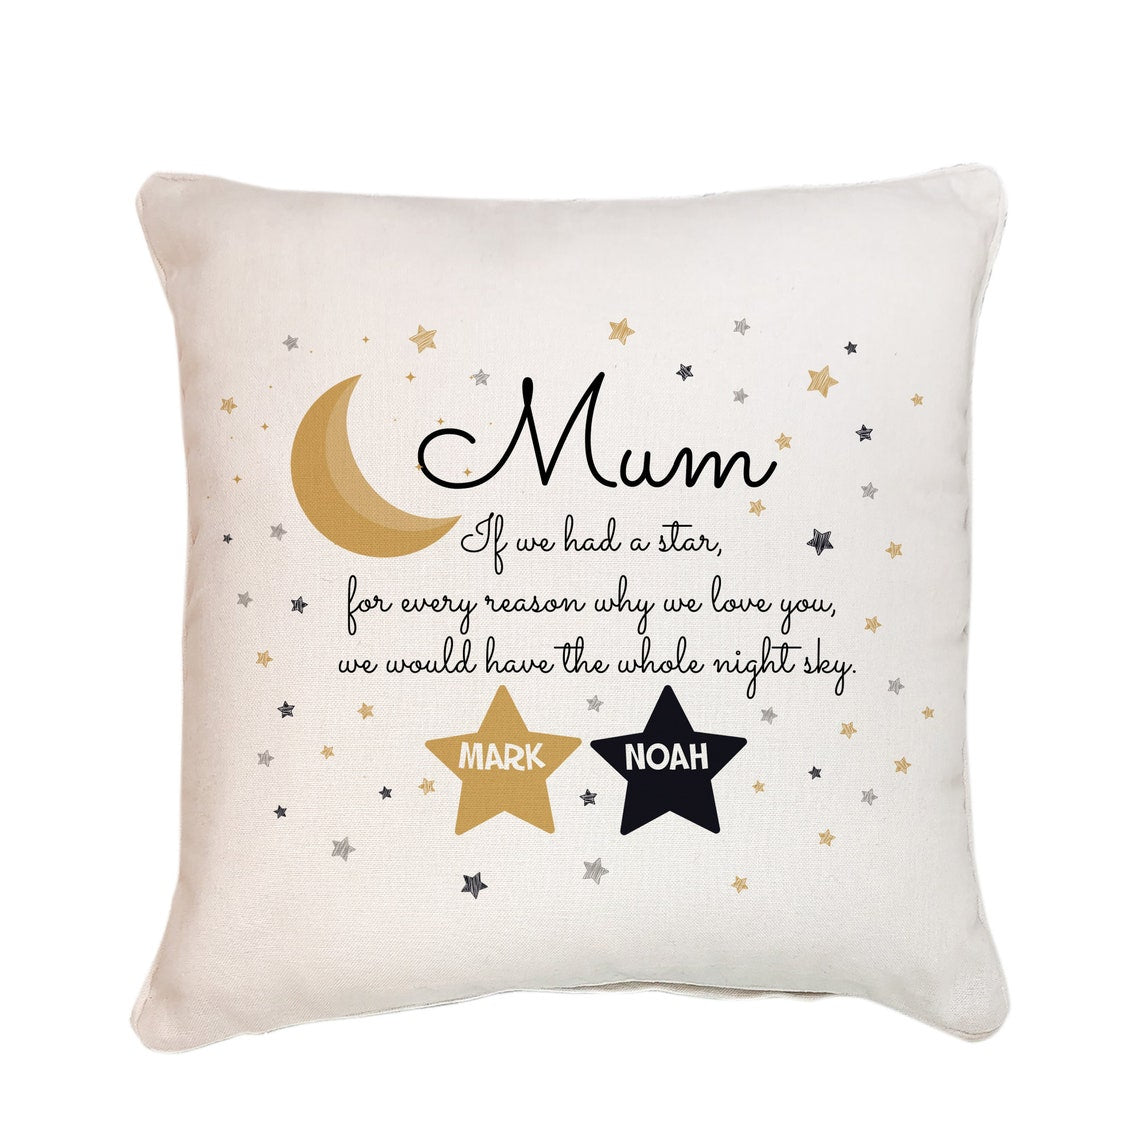 If We Had A Star - Personalized Custom Mother's Day Pillowcase